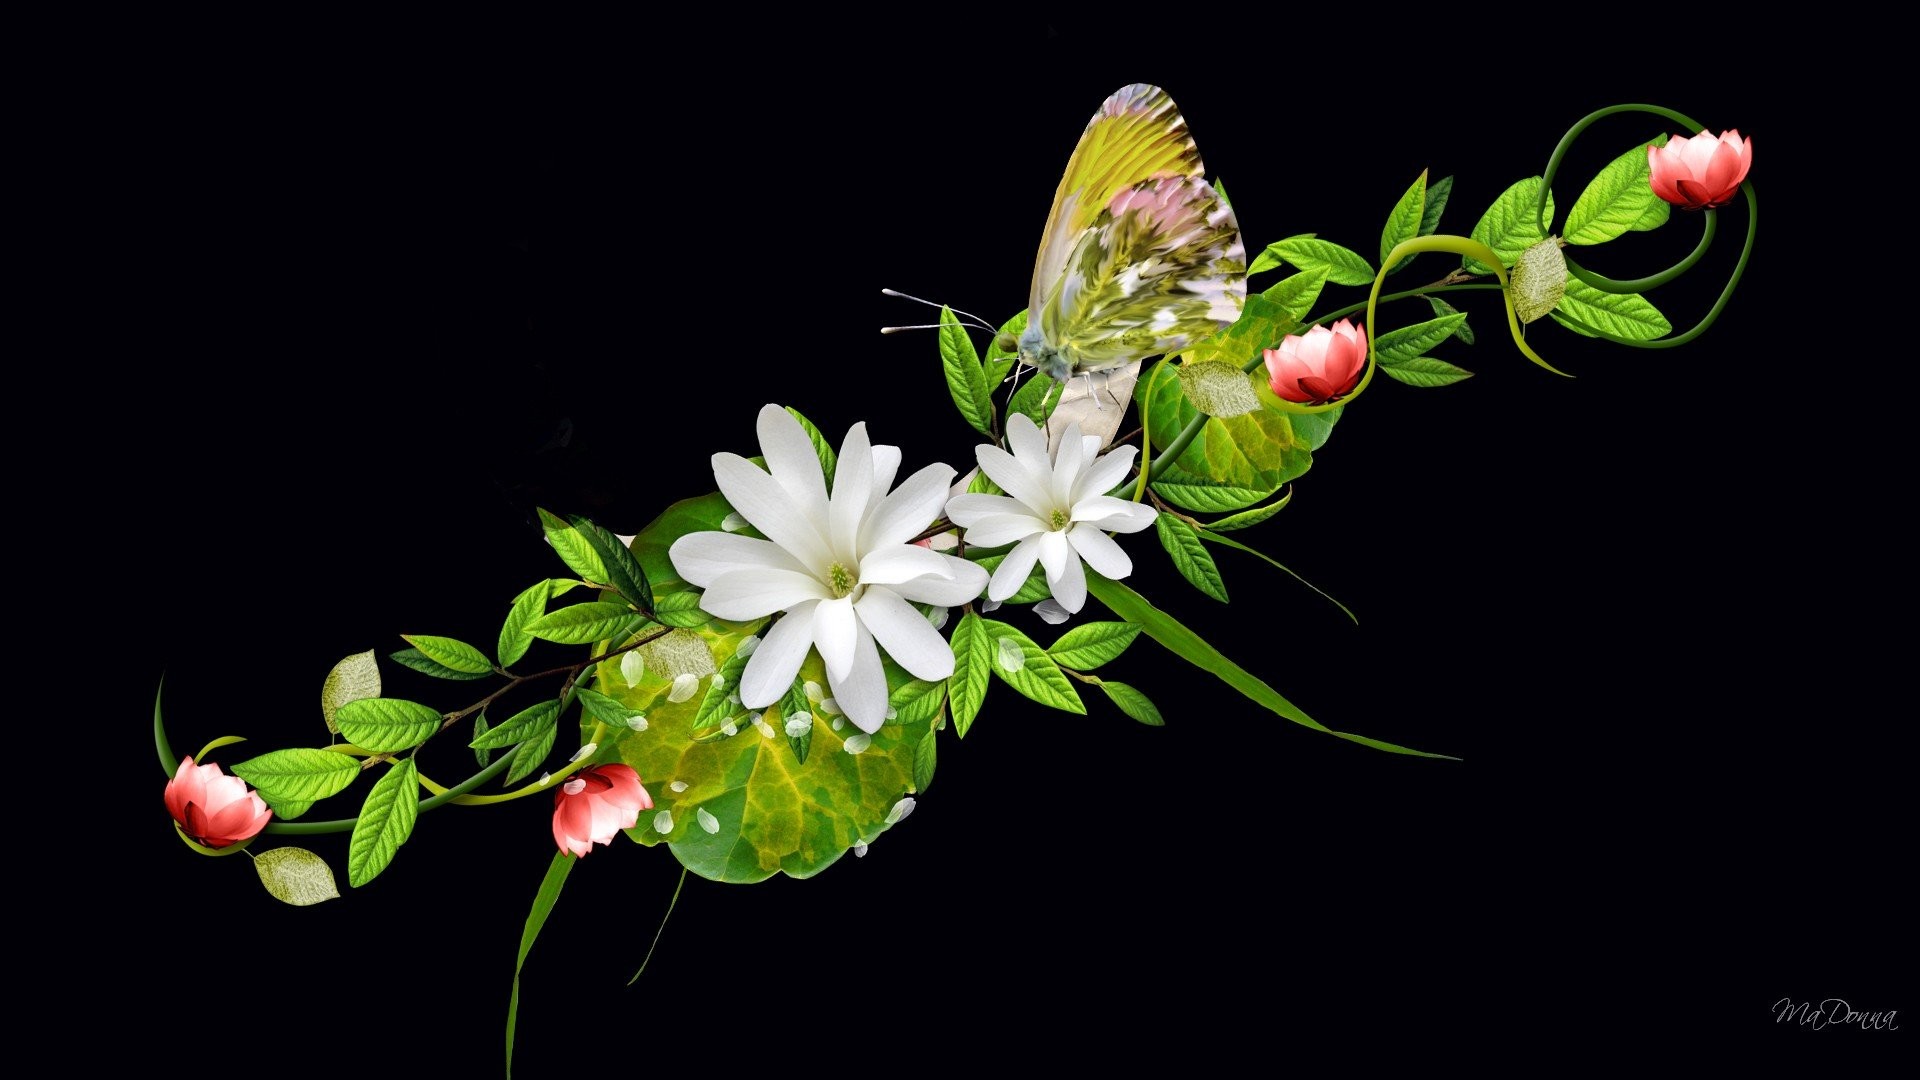 Beautiful Butterflies and Flowers Wallpapers (56+ images)